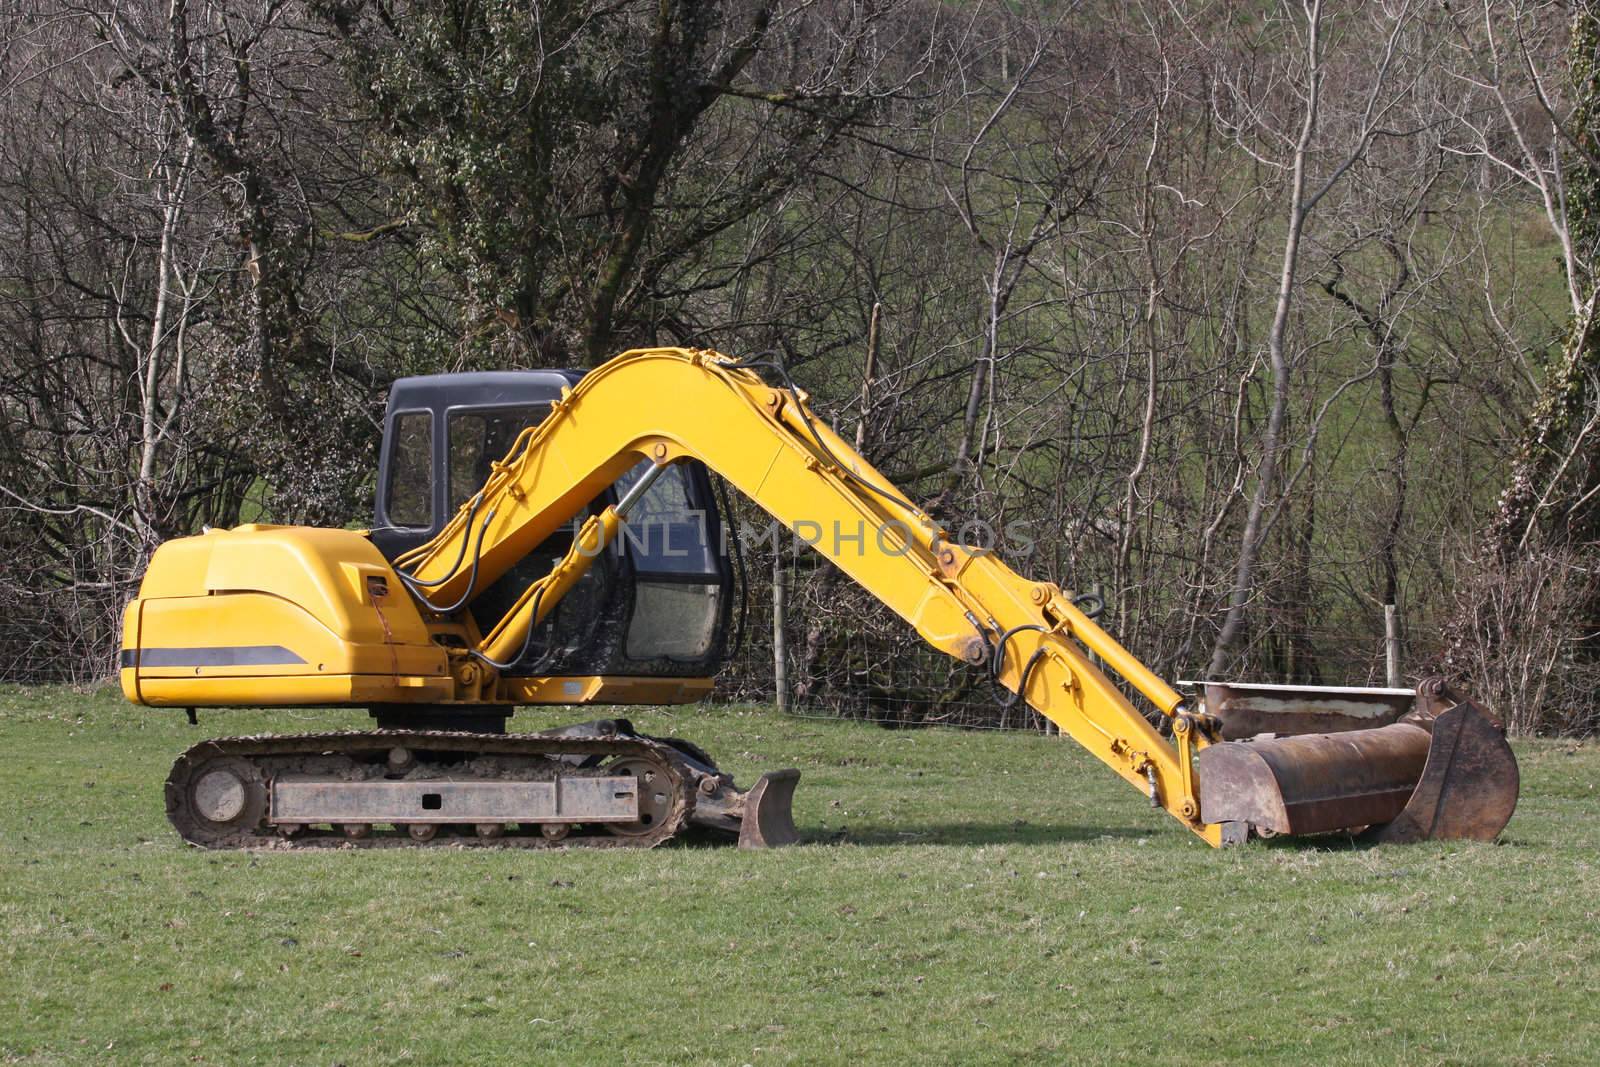 Digger excavator at work in a field